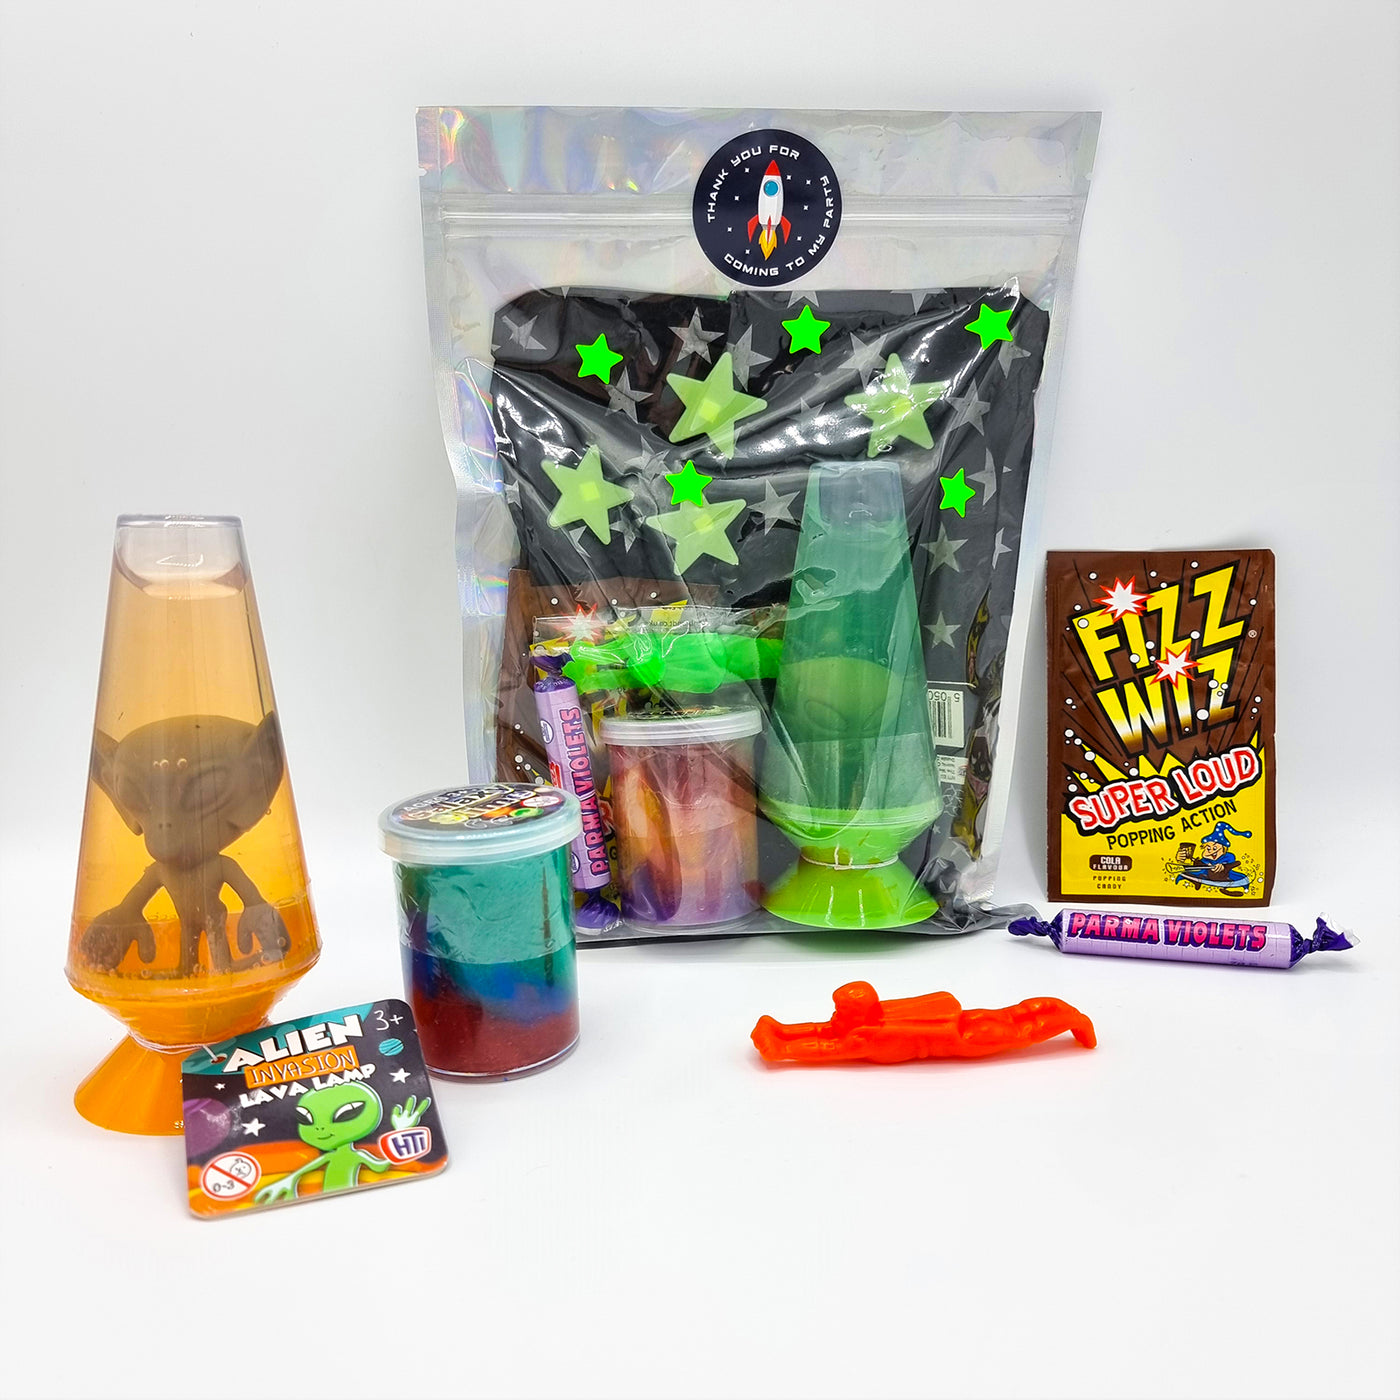 Galaxy Astronaut Alien Space Pre Filled Party Bags, Rocket Space Goodie Bags For Children With Alien Slime, Toys And Sweets. Party favours for children. 